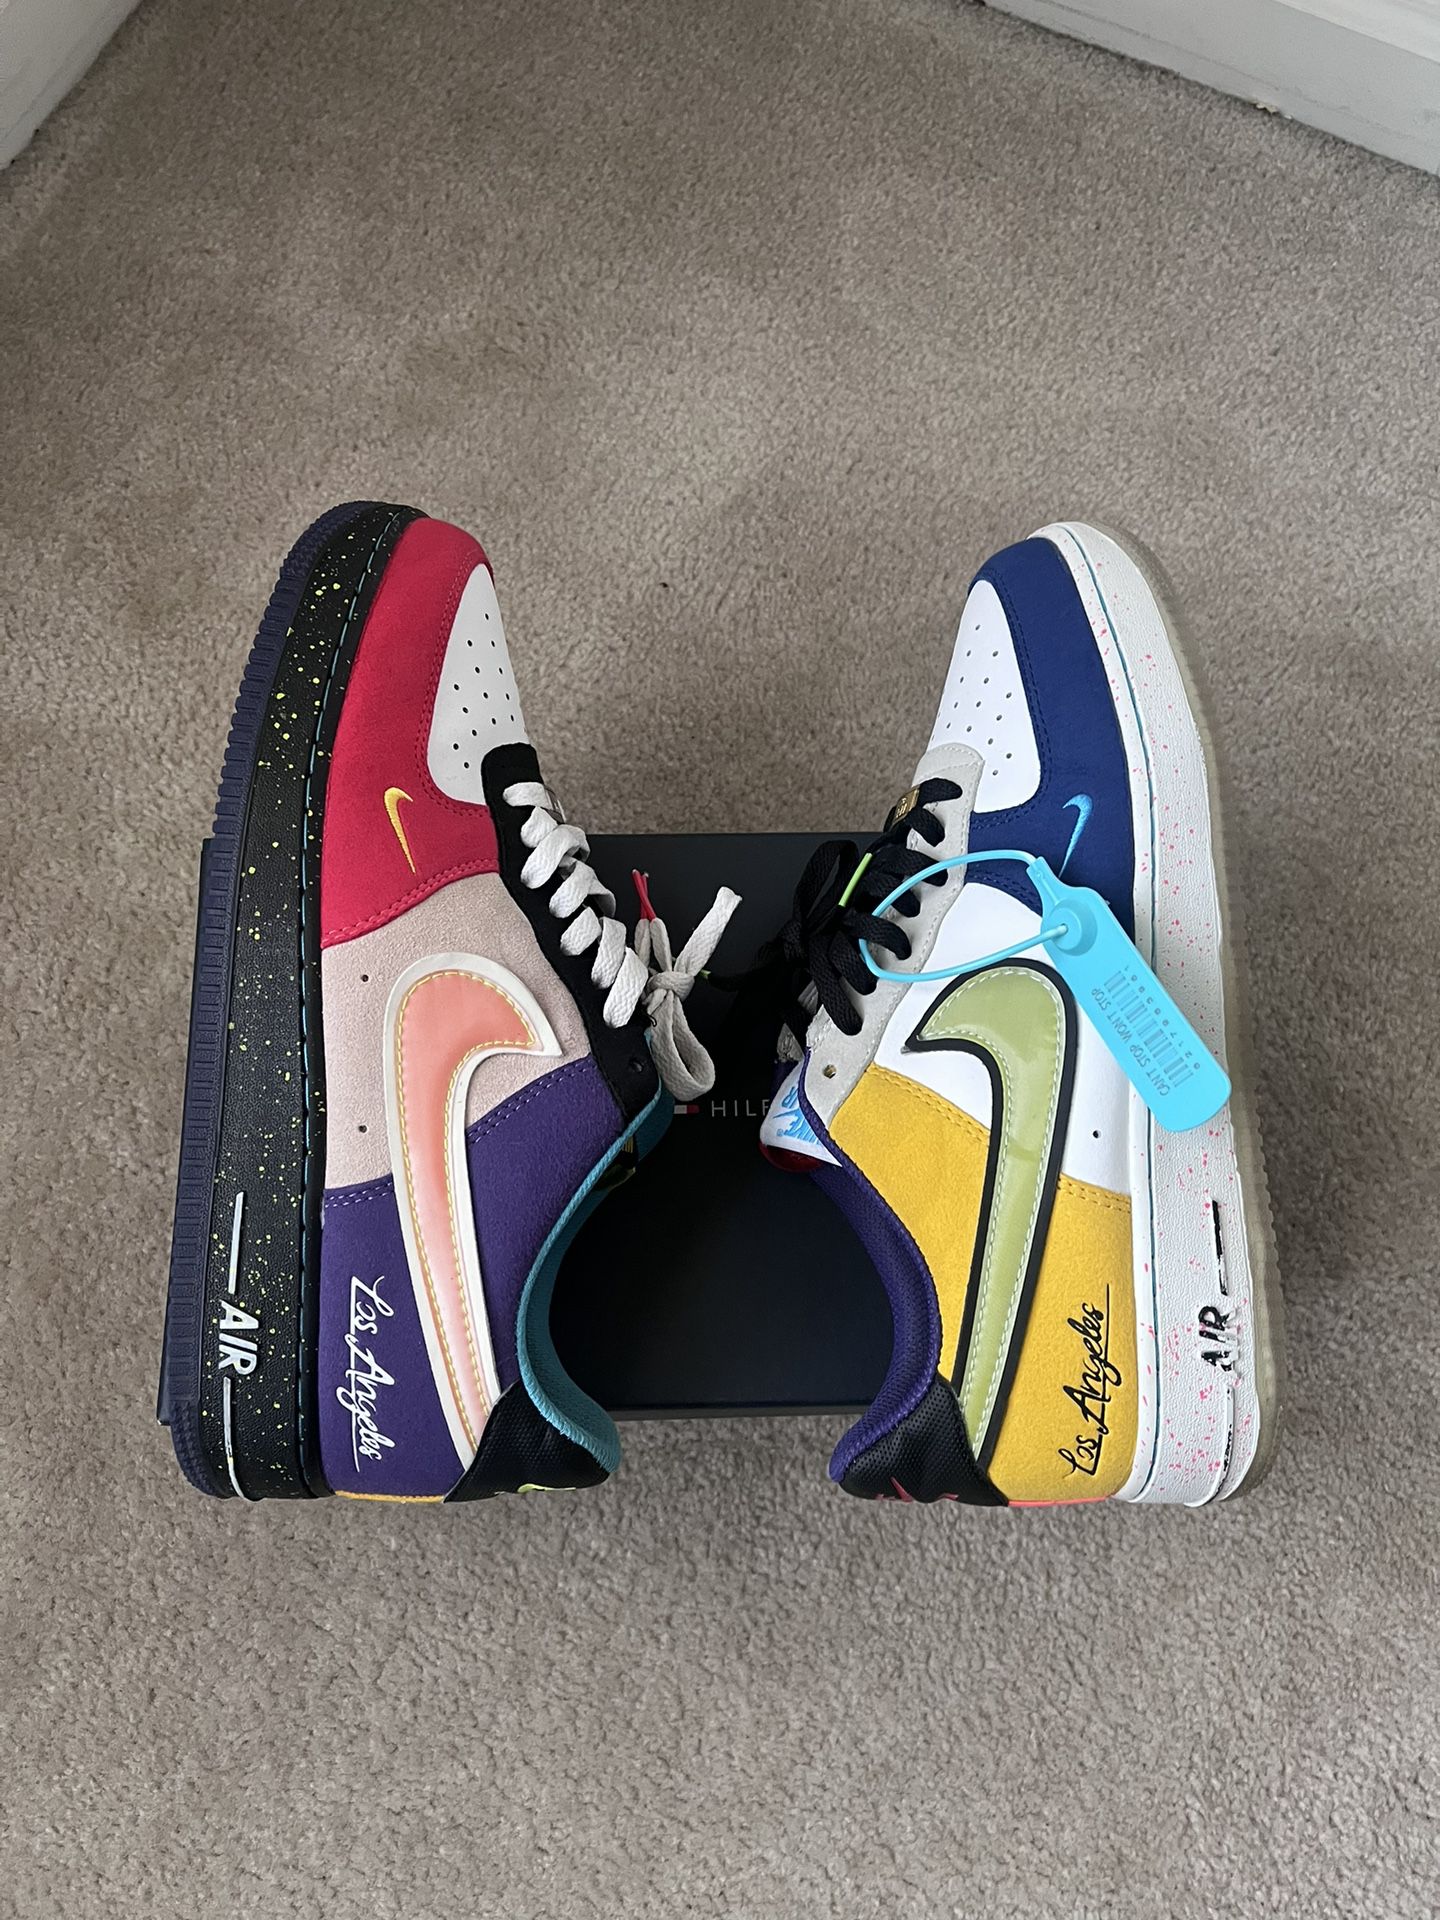 Nike Air Force 1 “What’s The LA” for Sale in Hiram, GA - OfferUp